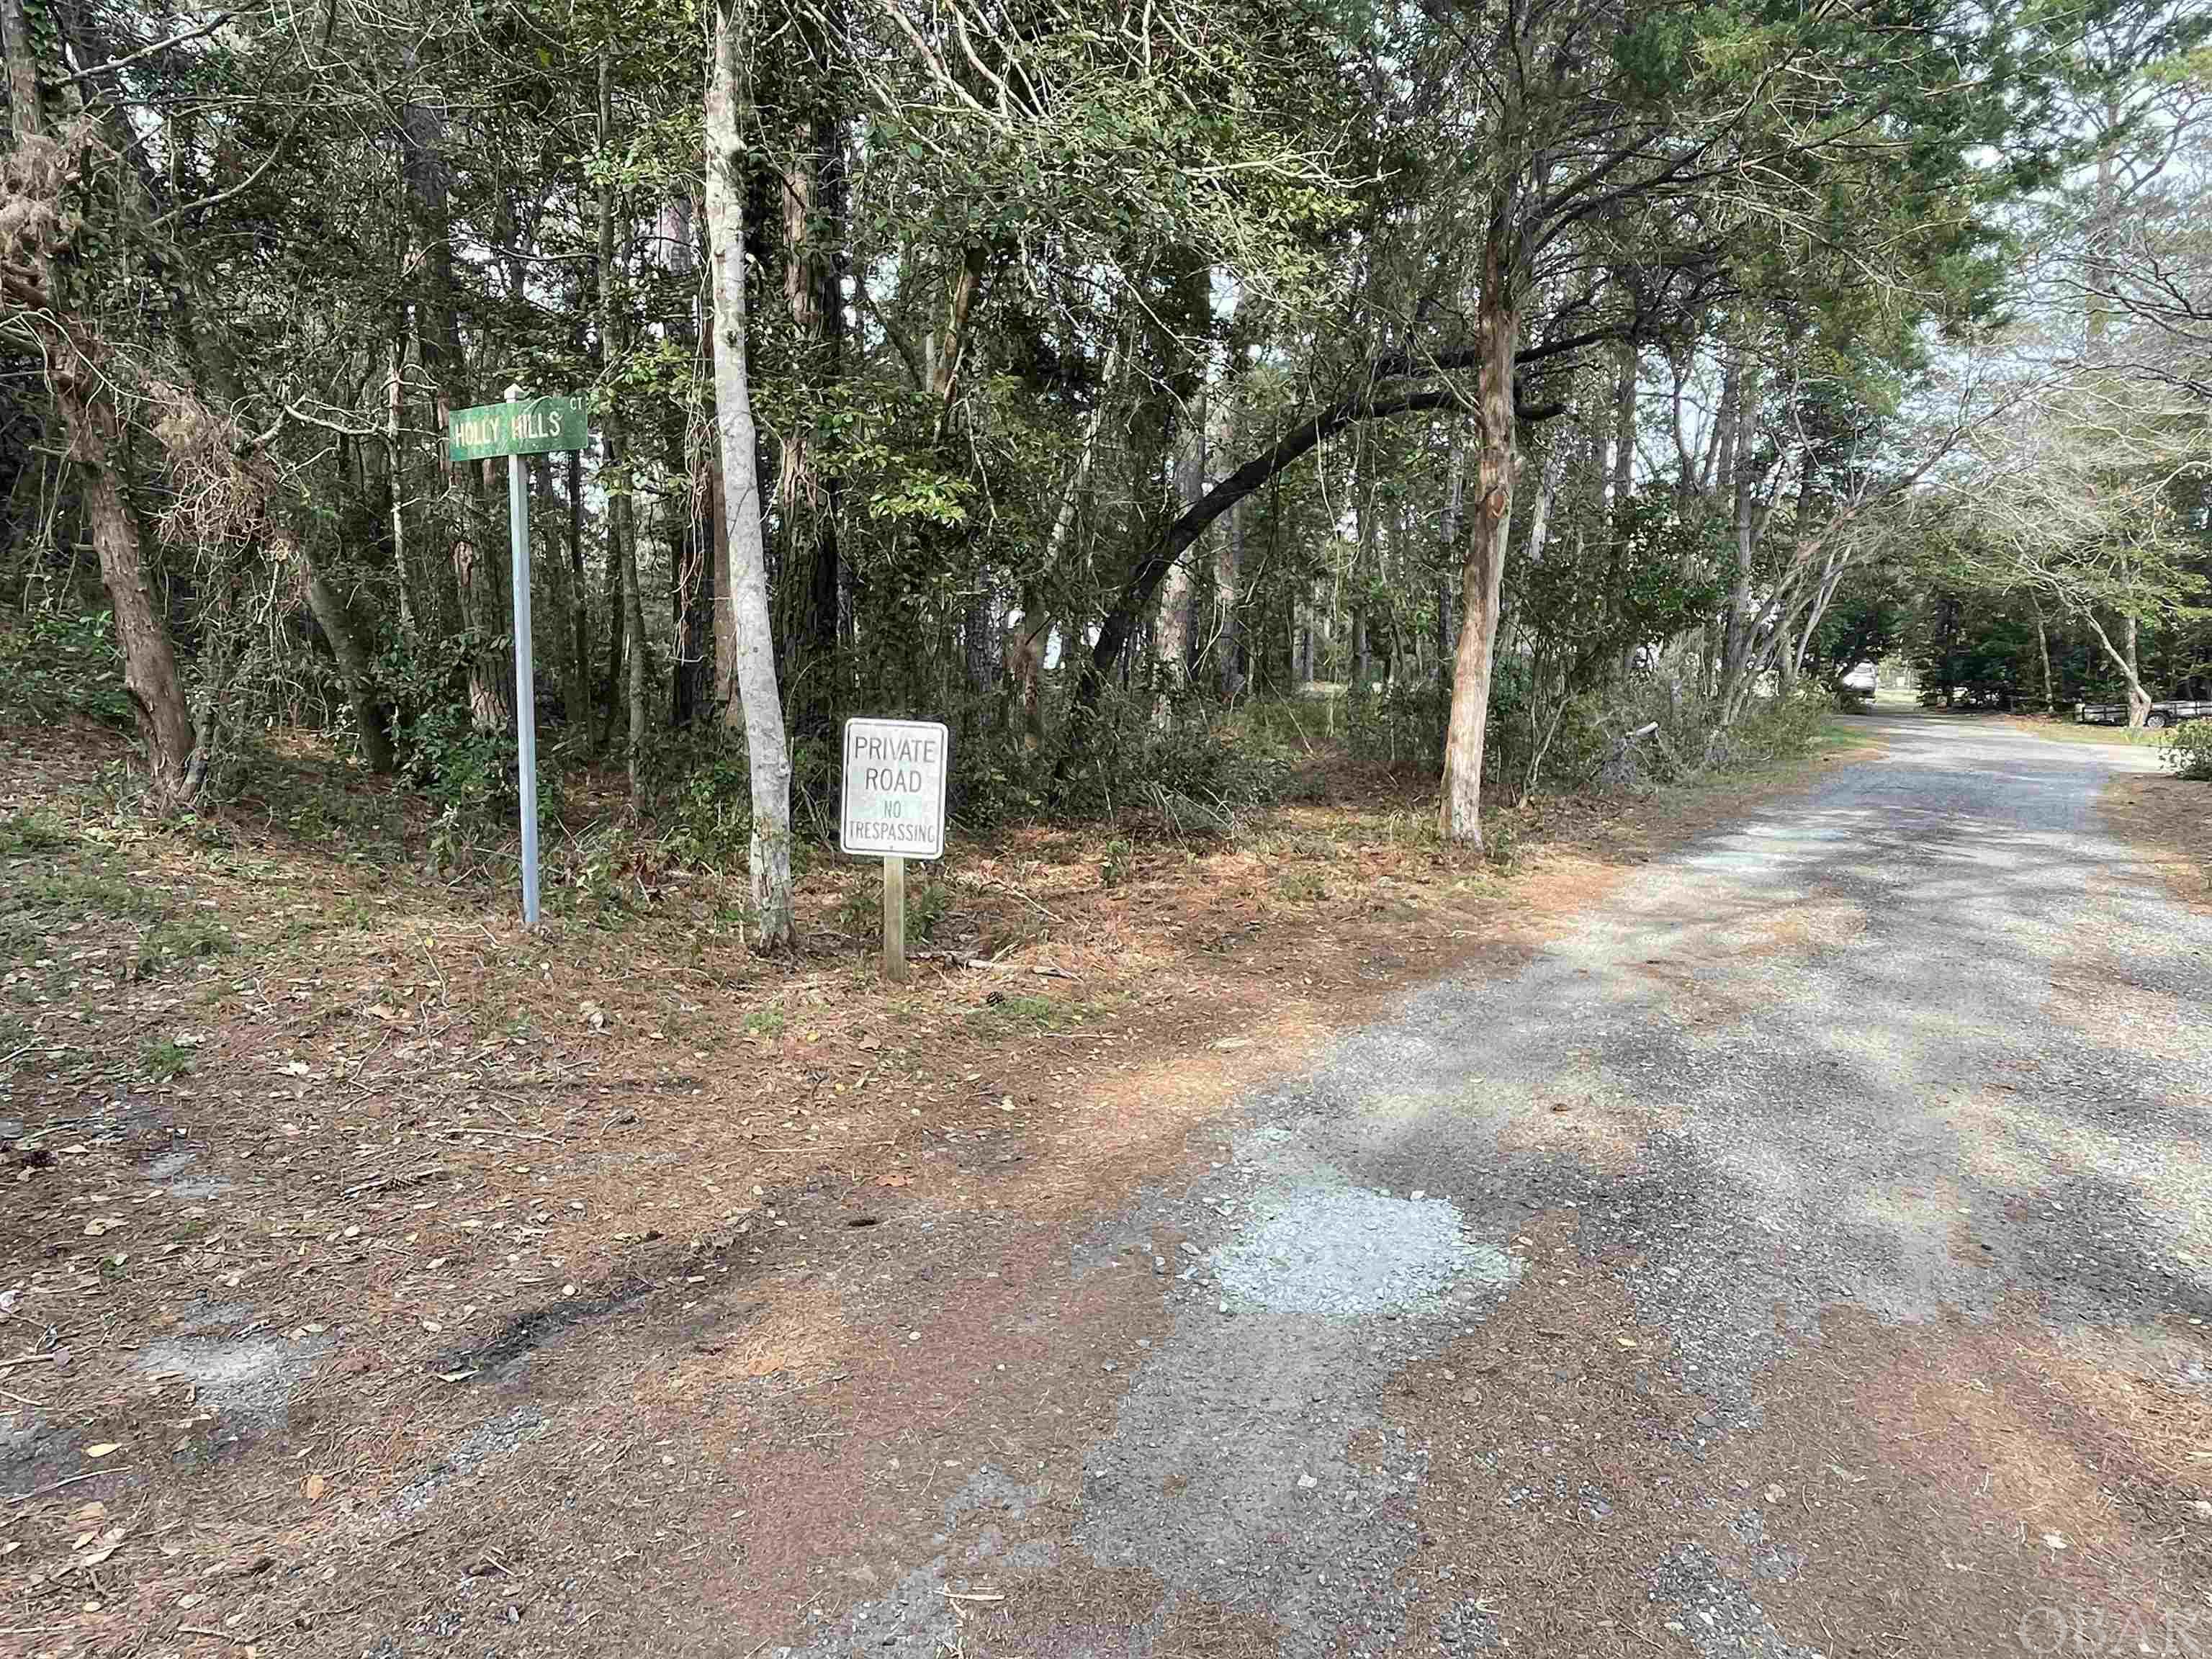 This lot is a gem! A wonderful homesite on one of the highest properties on Roanoke Island. It is located in a peaceful quiet neighborhood with few houses and lots of trees, and a short walk or bike ride to all three schools in town.